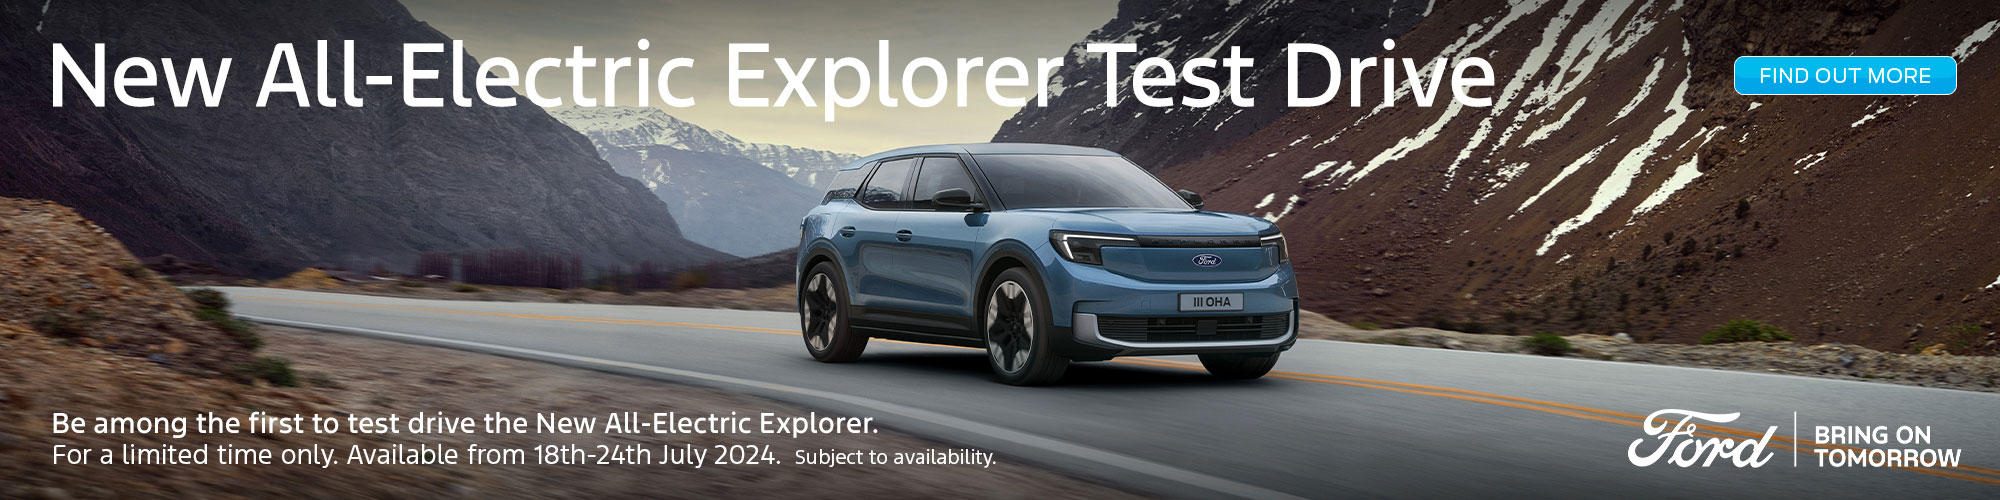 New All-Electric Explorer Test Drive - Book Yours!